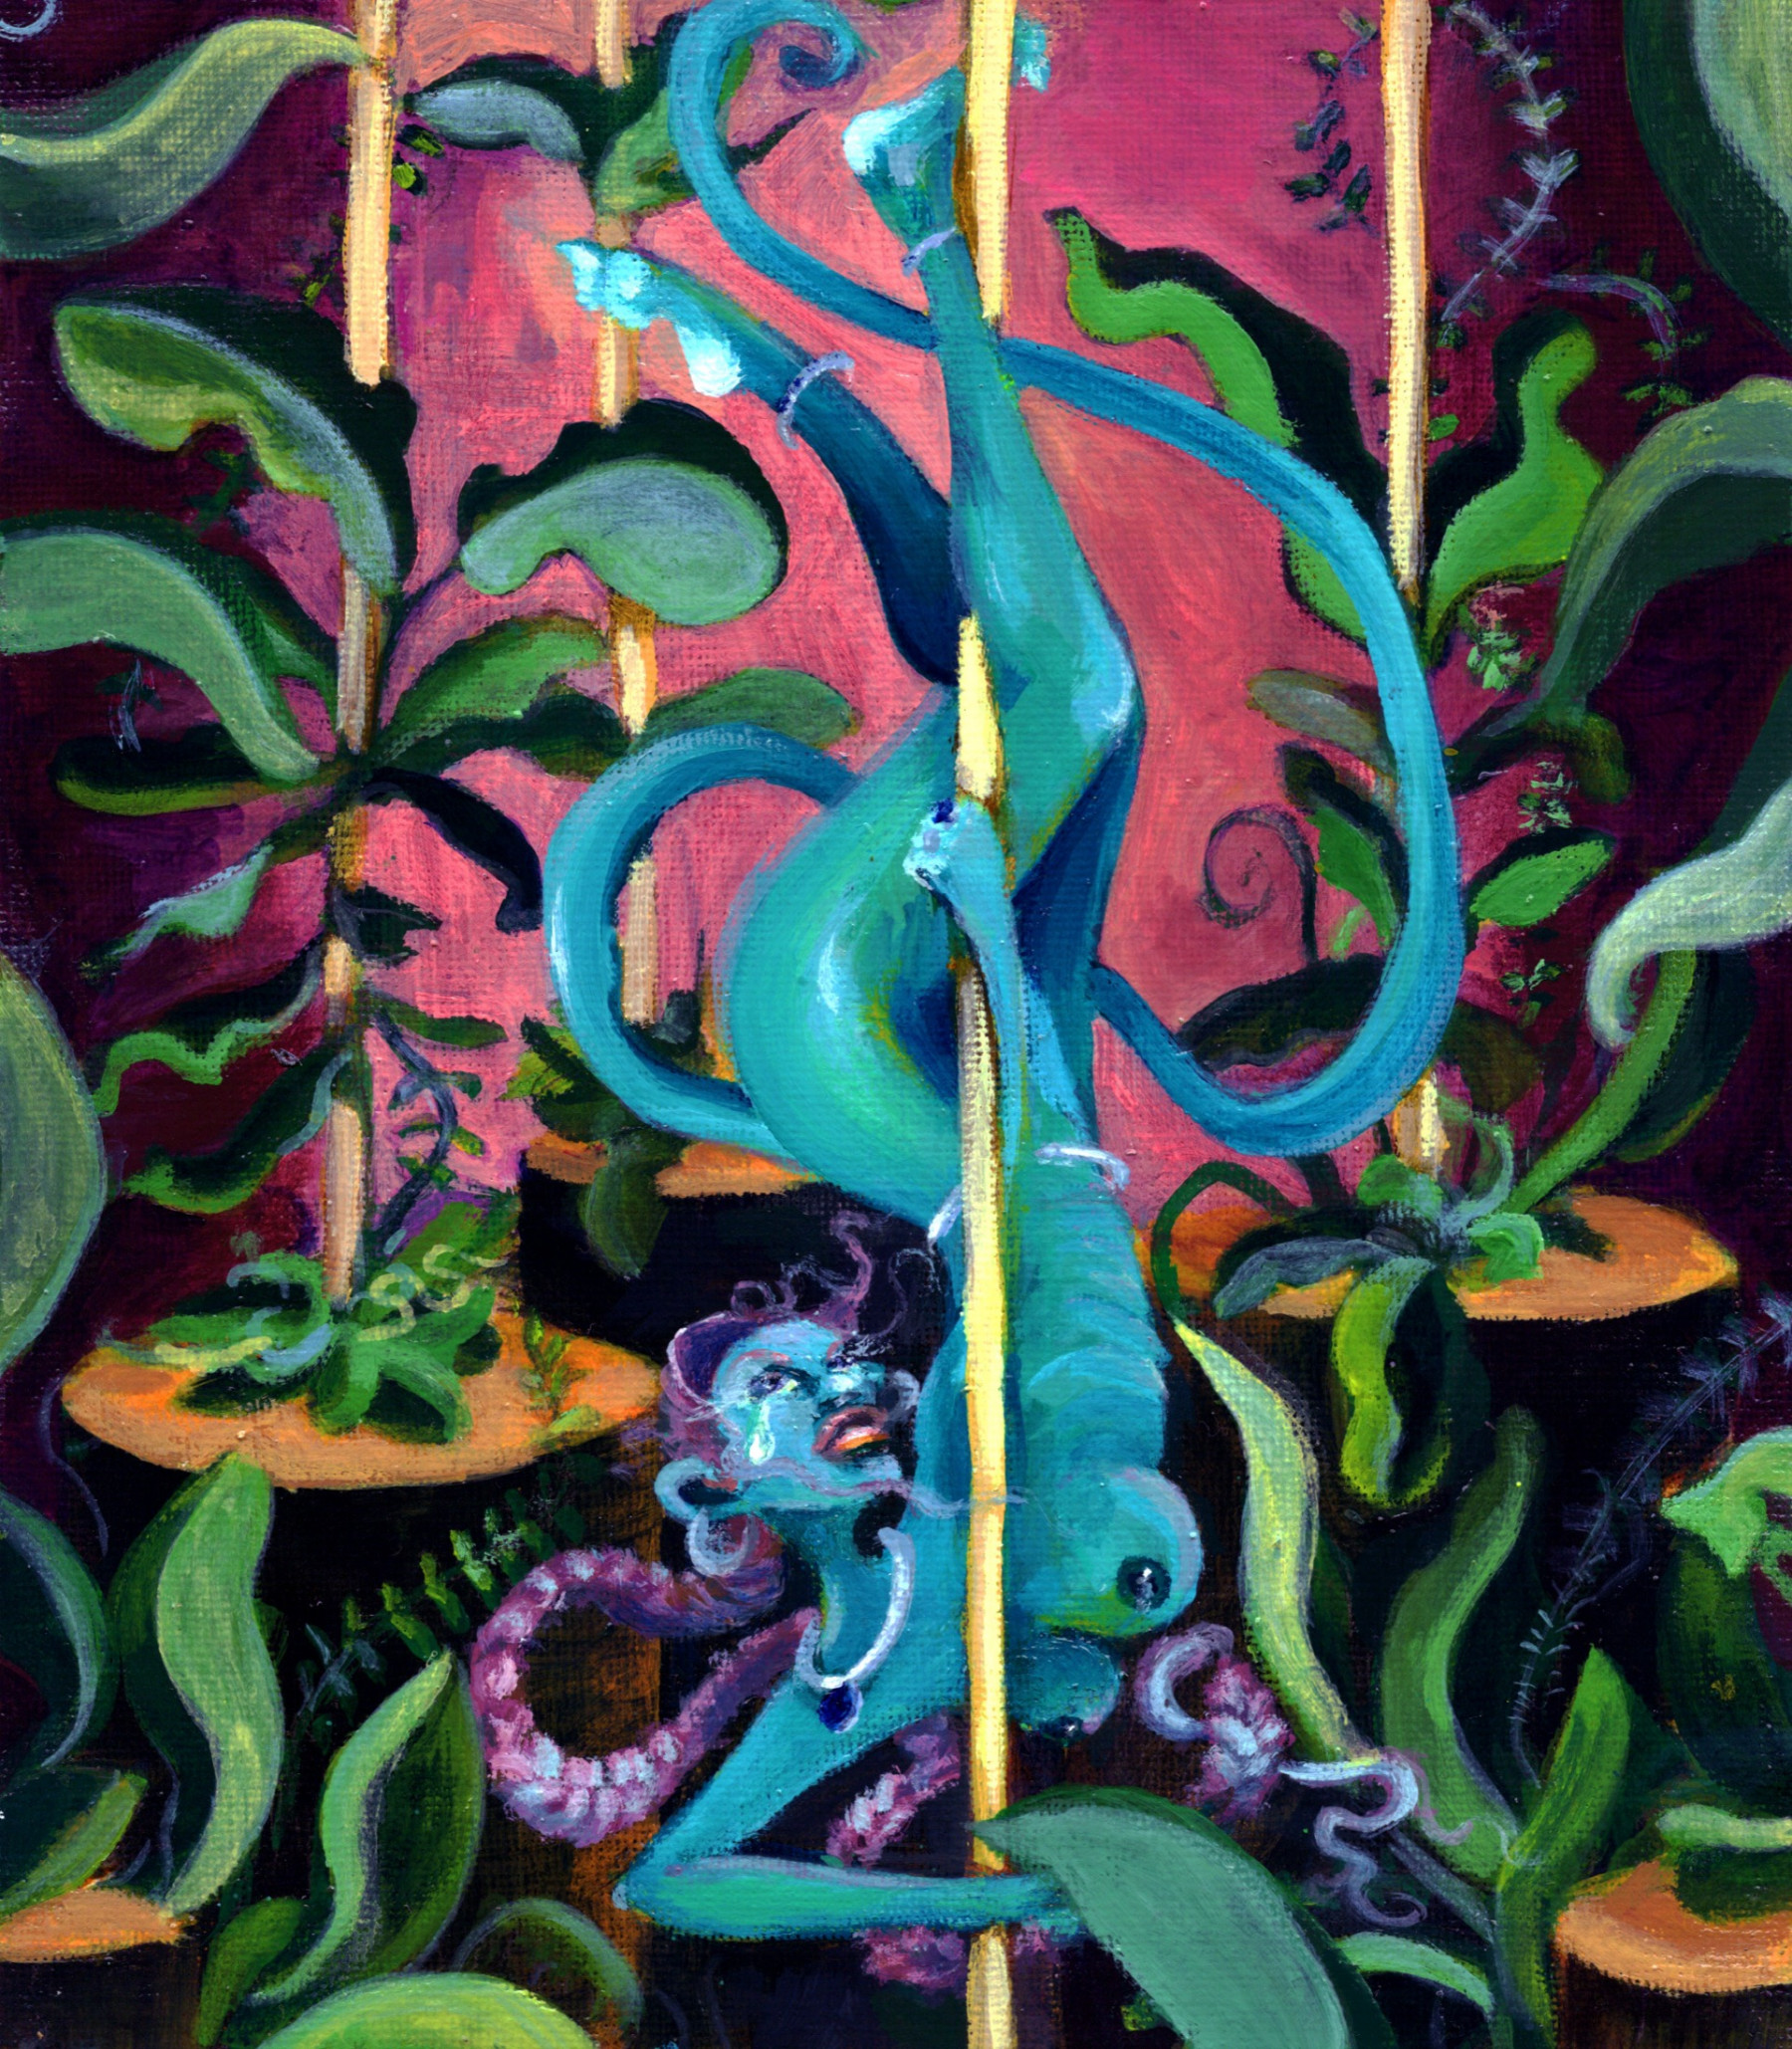 The painting depicts a blue woman, upside down, dancing around a stripper pole and being held up by her legs as she looks upwards, surrounded by greenery growing up other poles in the background of the image.